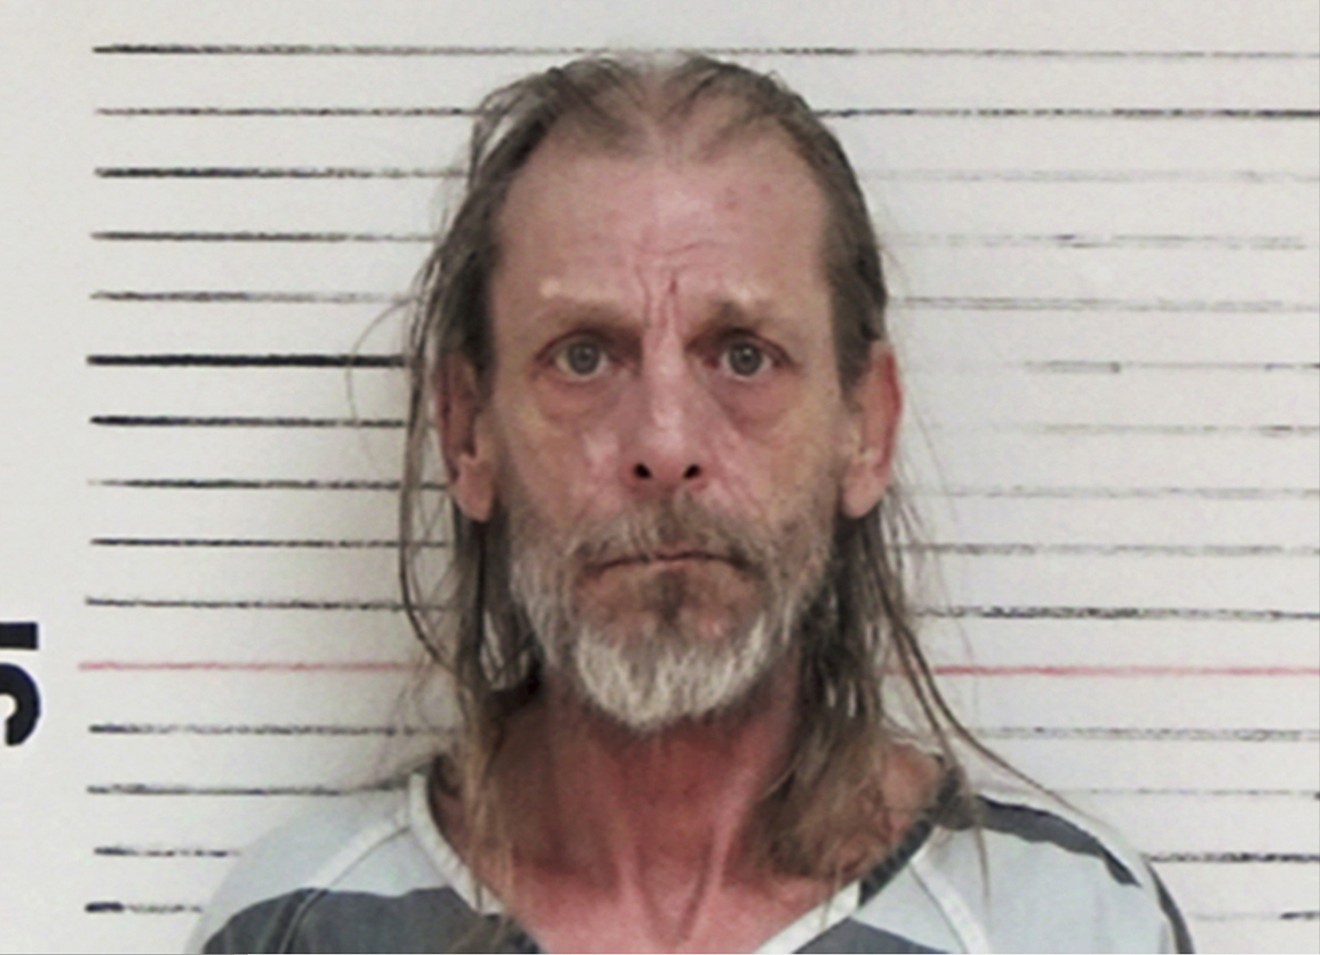 Ricky Lee Adkins, 59, arrested on a charge of capital murder for a 29-year-old cold case murder.